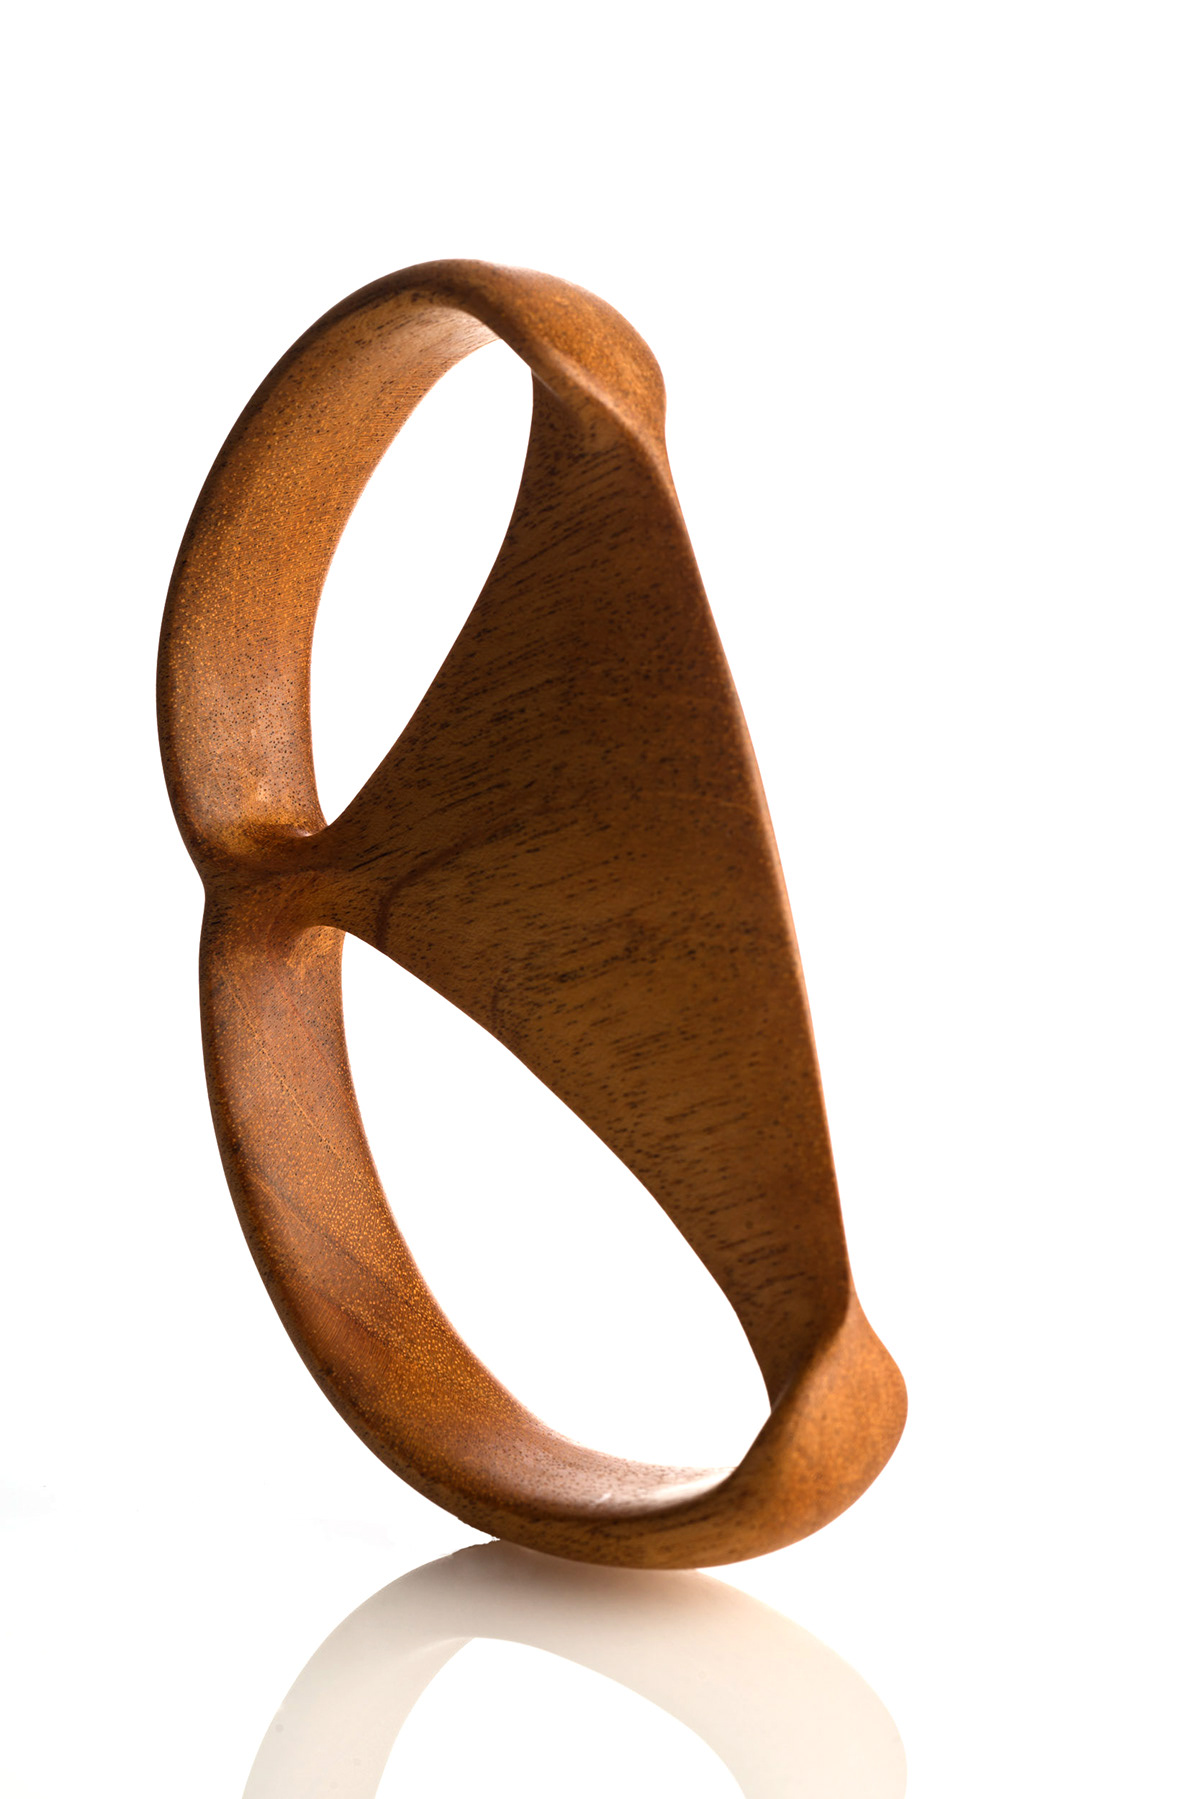 interactive jewelry handcarved wood Hand carved wood wooden jewelry